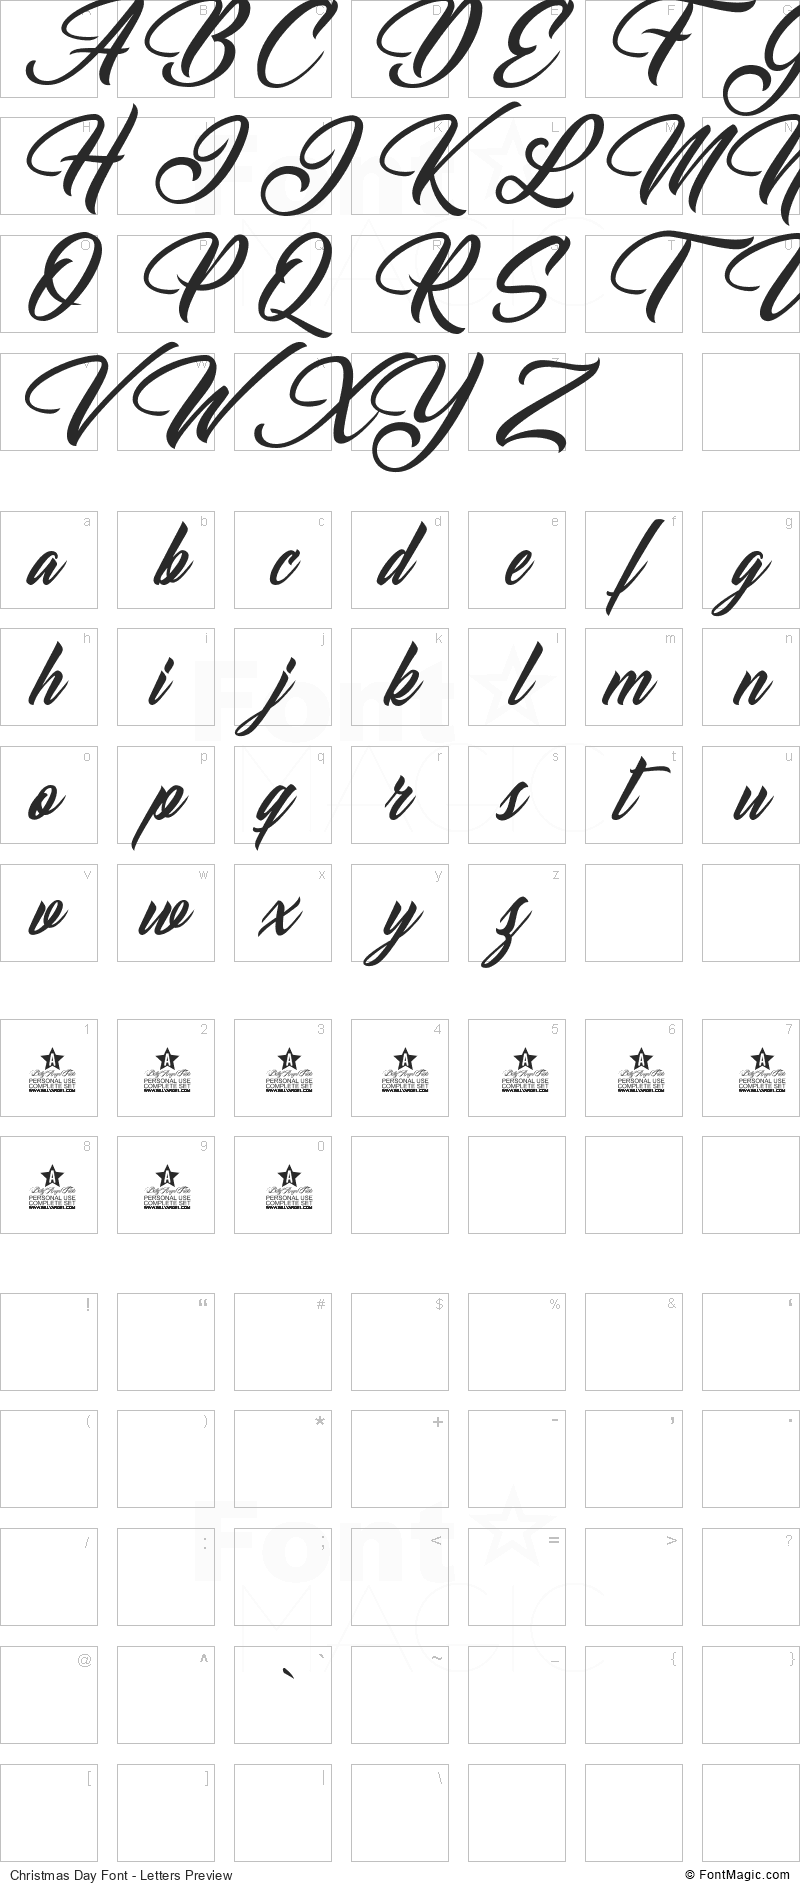 Christmas Day Font - All Latters Preview Chart